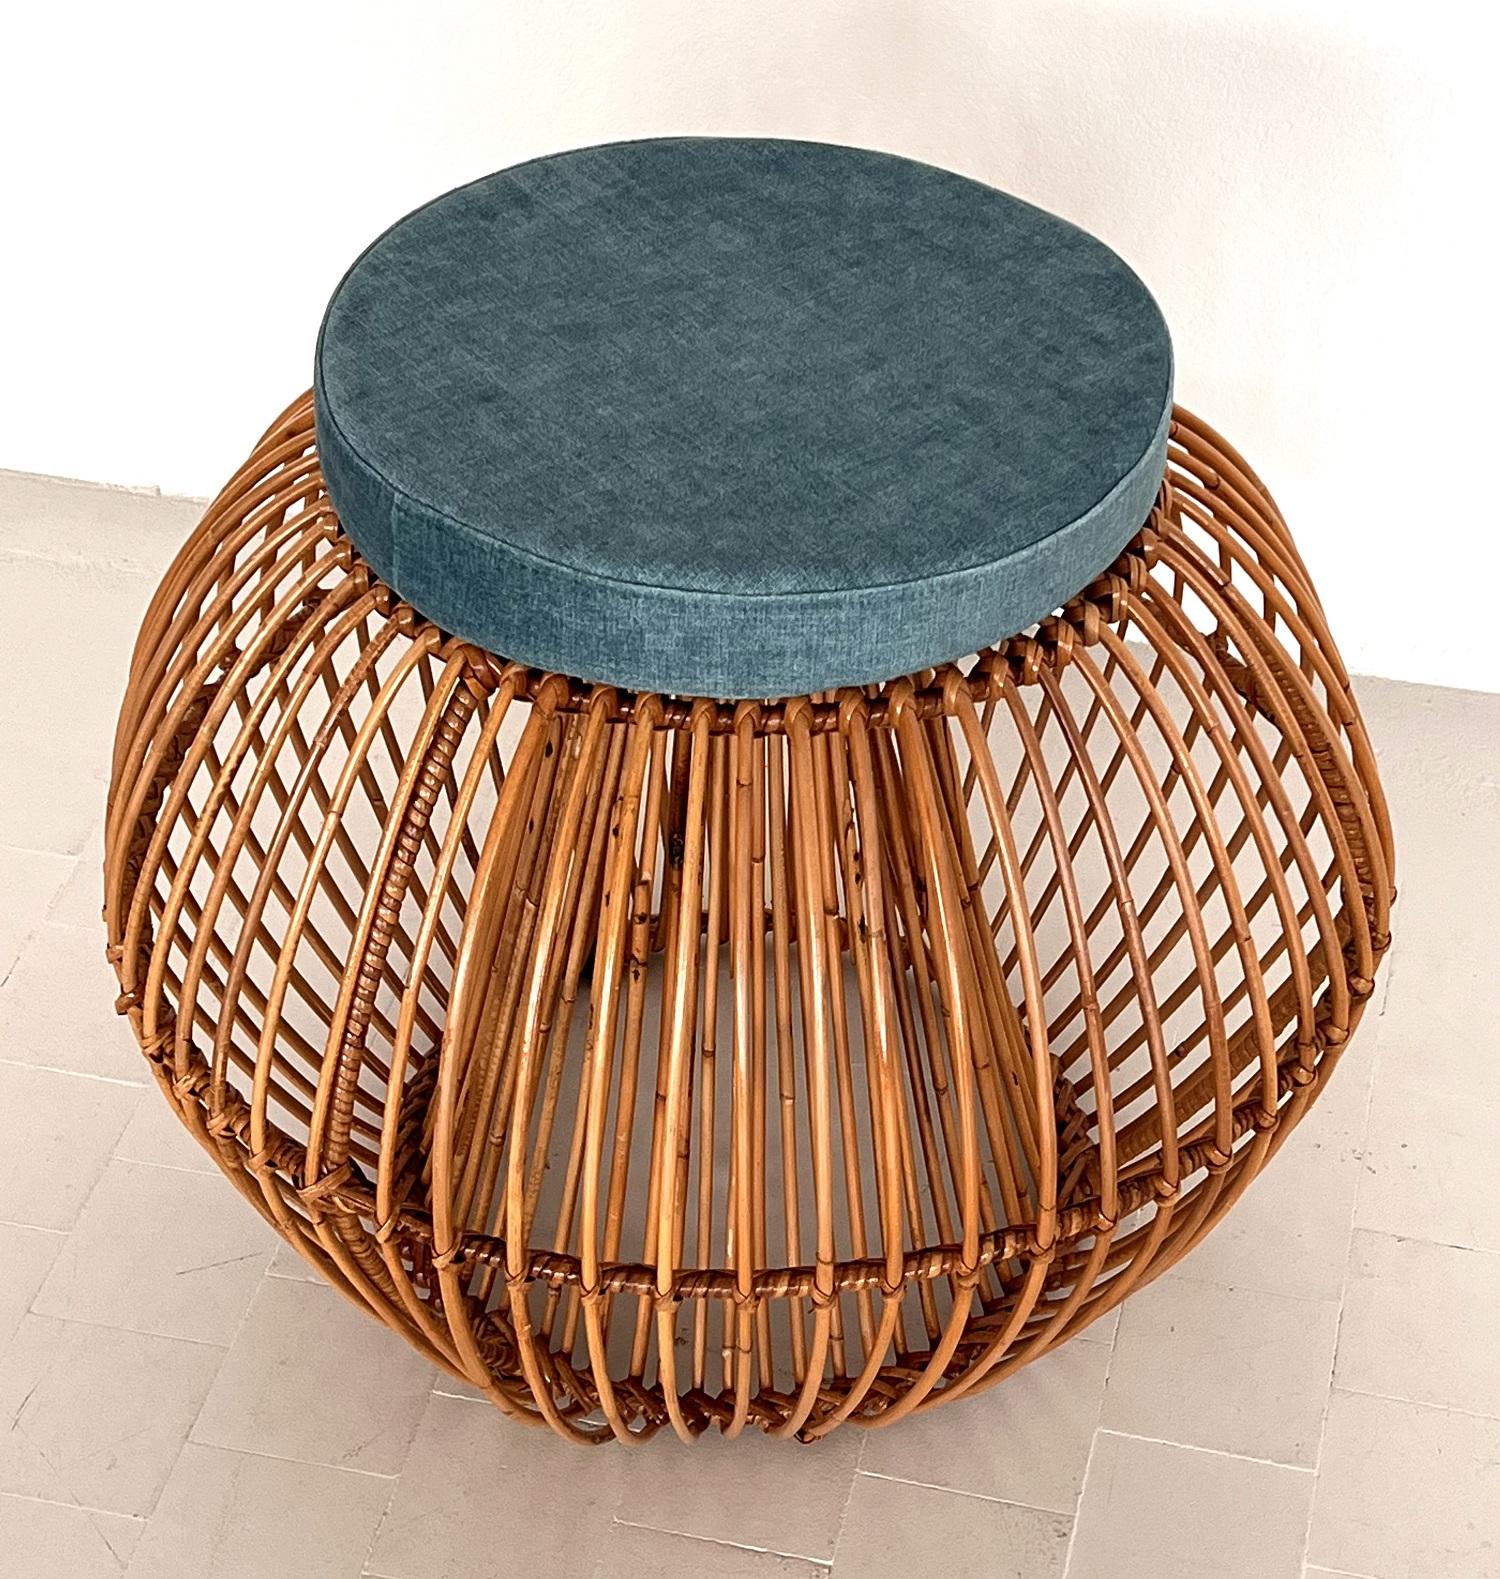 French Janine Abraham & Dirk Jan Rol Midcentury Bamboo Stool with new cushion, 1960s For Sale